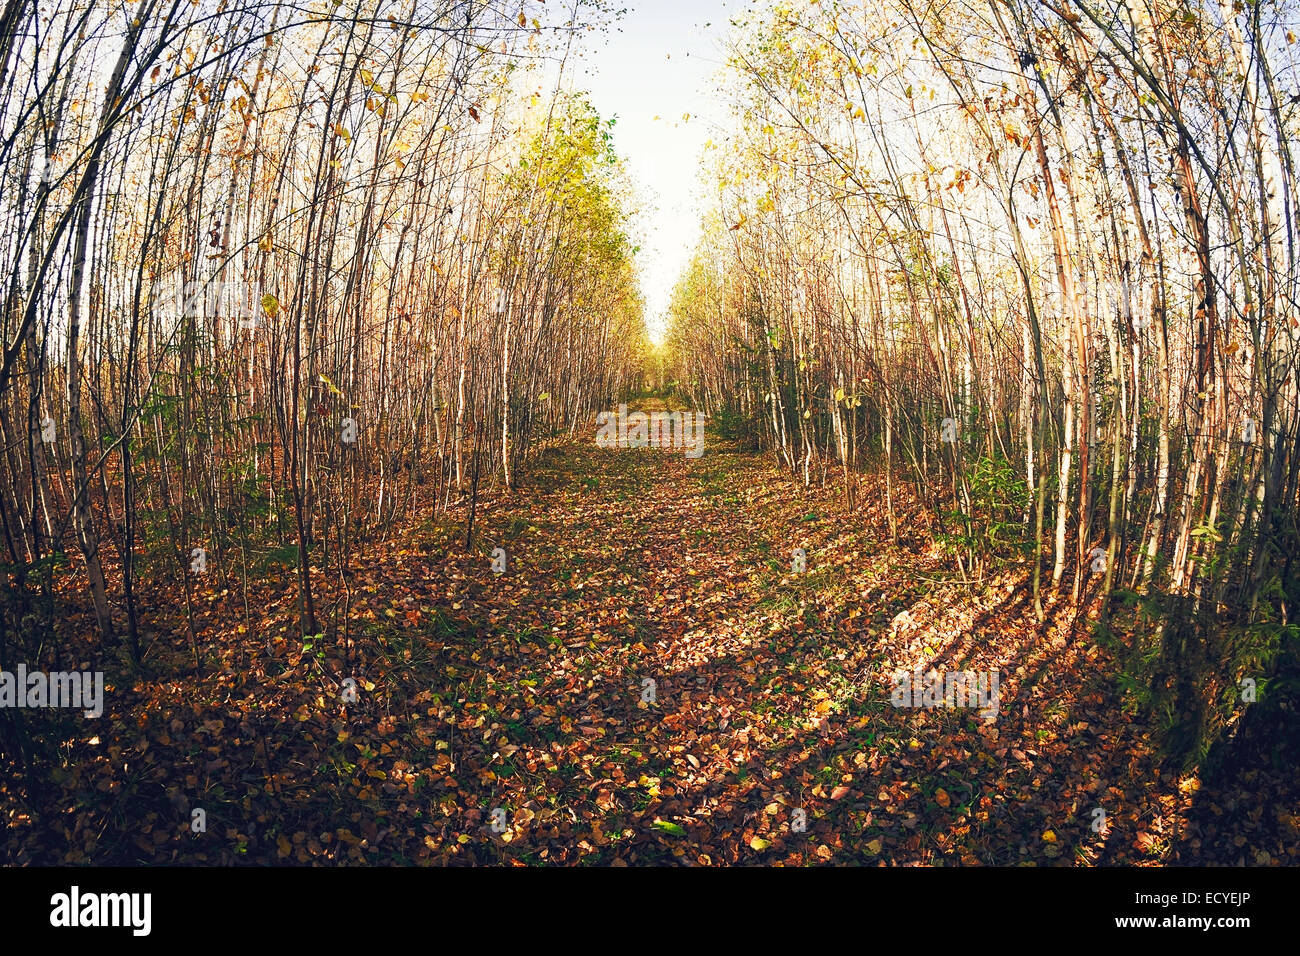 Fish-eye lens view of path in forest Stock Photo